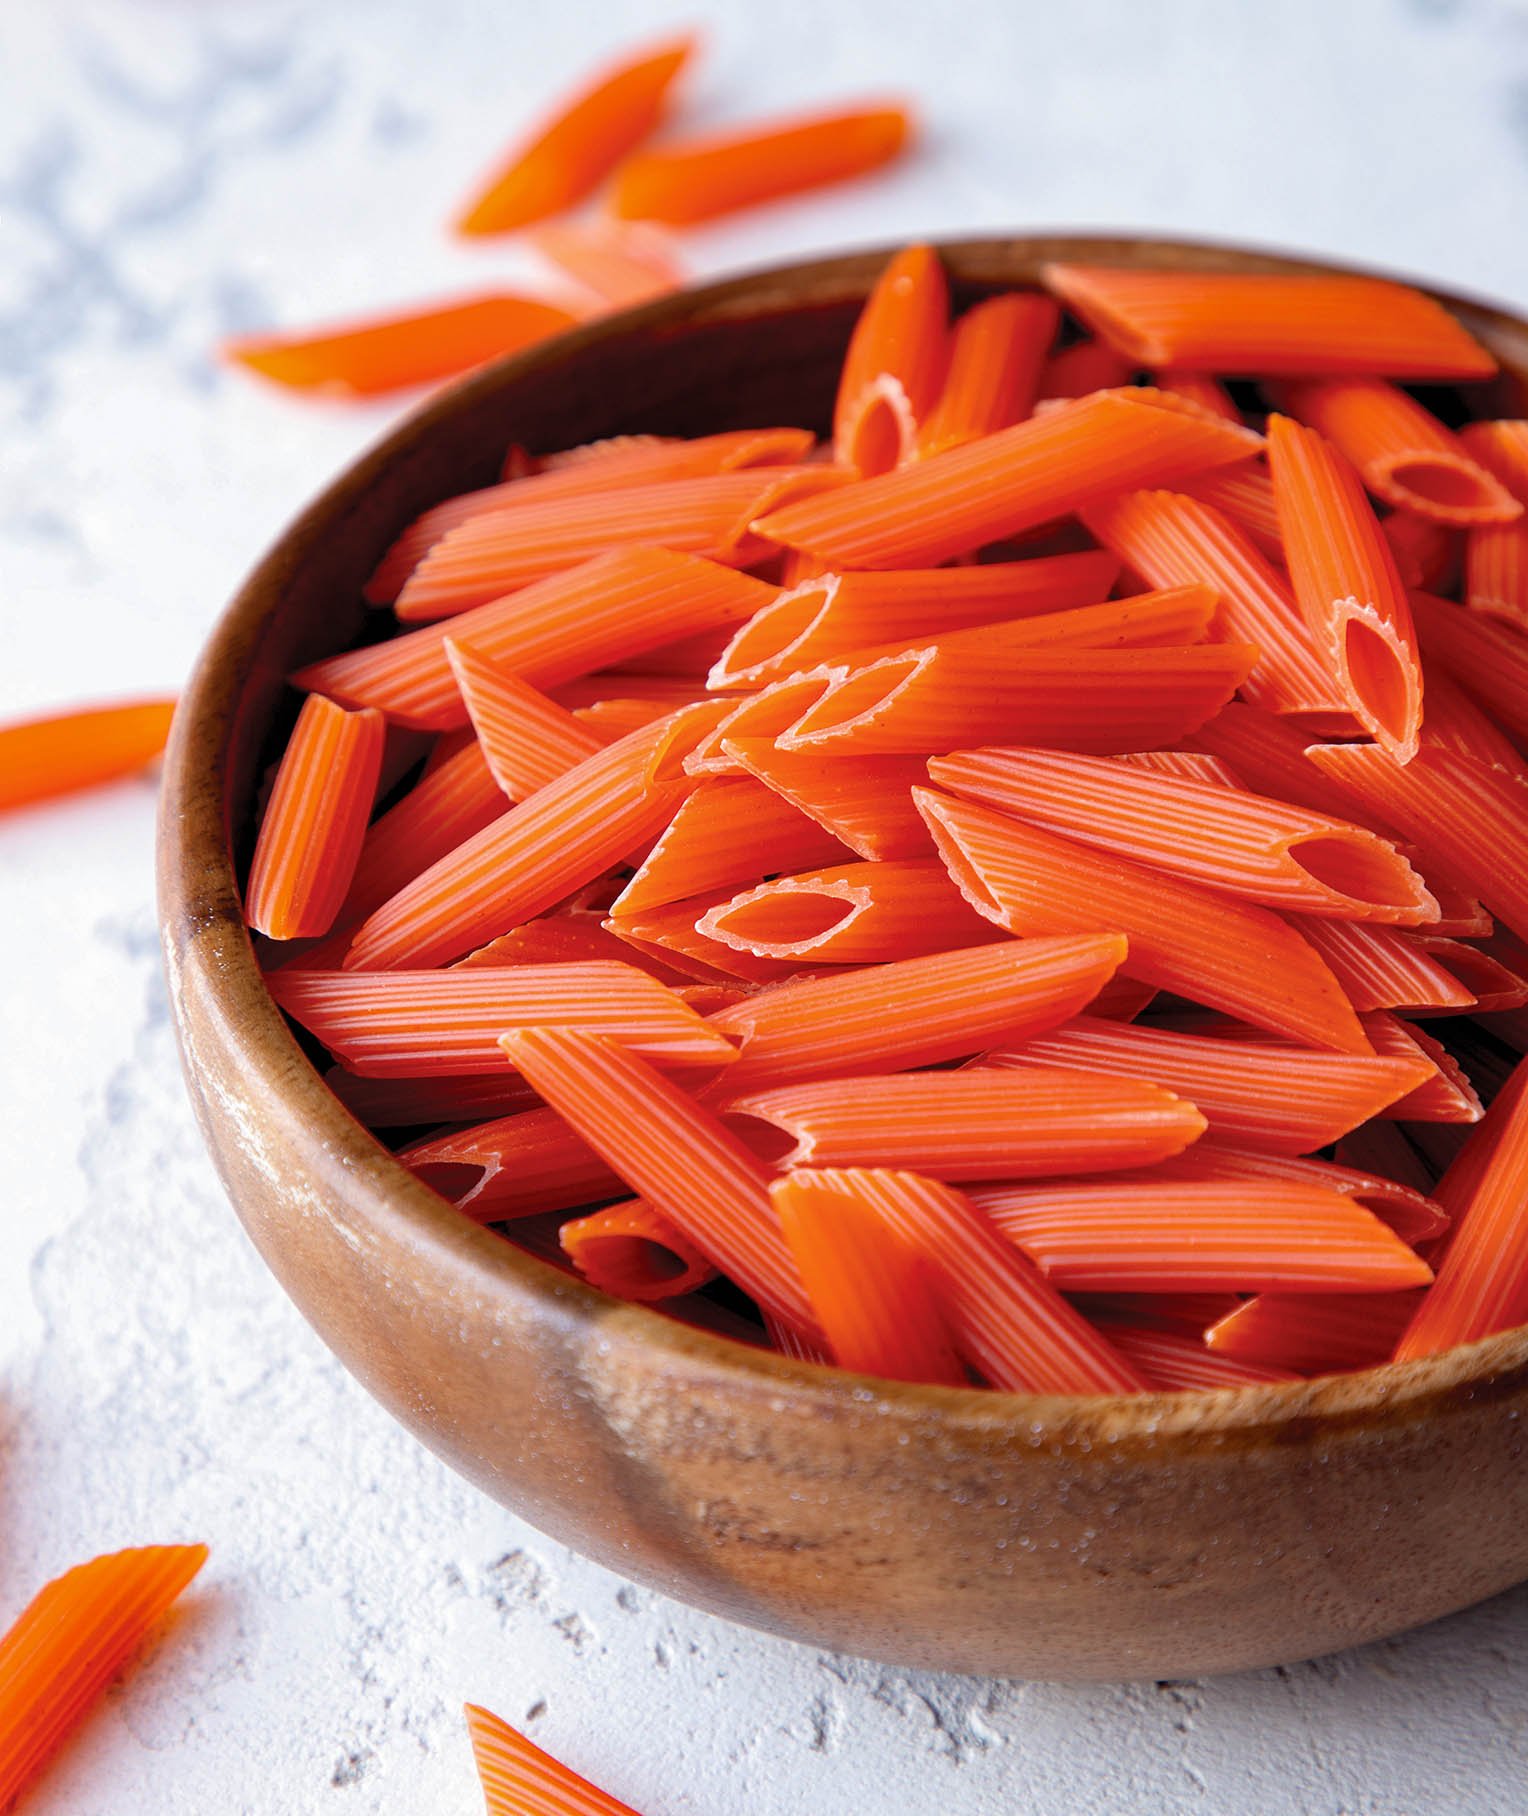 Pasta with a Purpose: Introducing Organic Red Lentil Penne Pasta